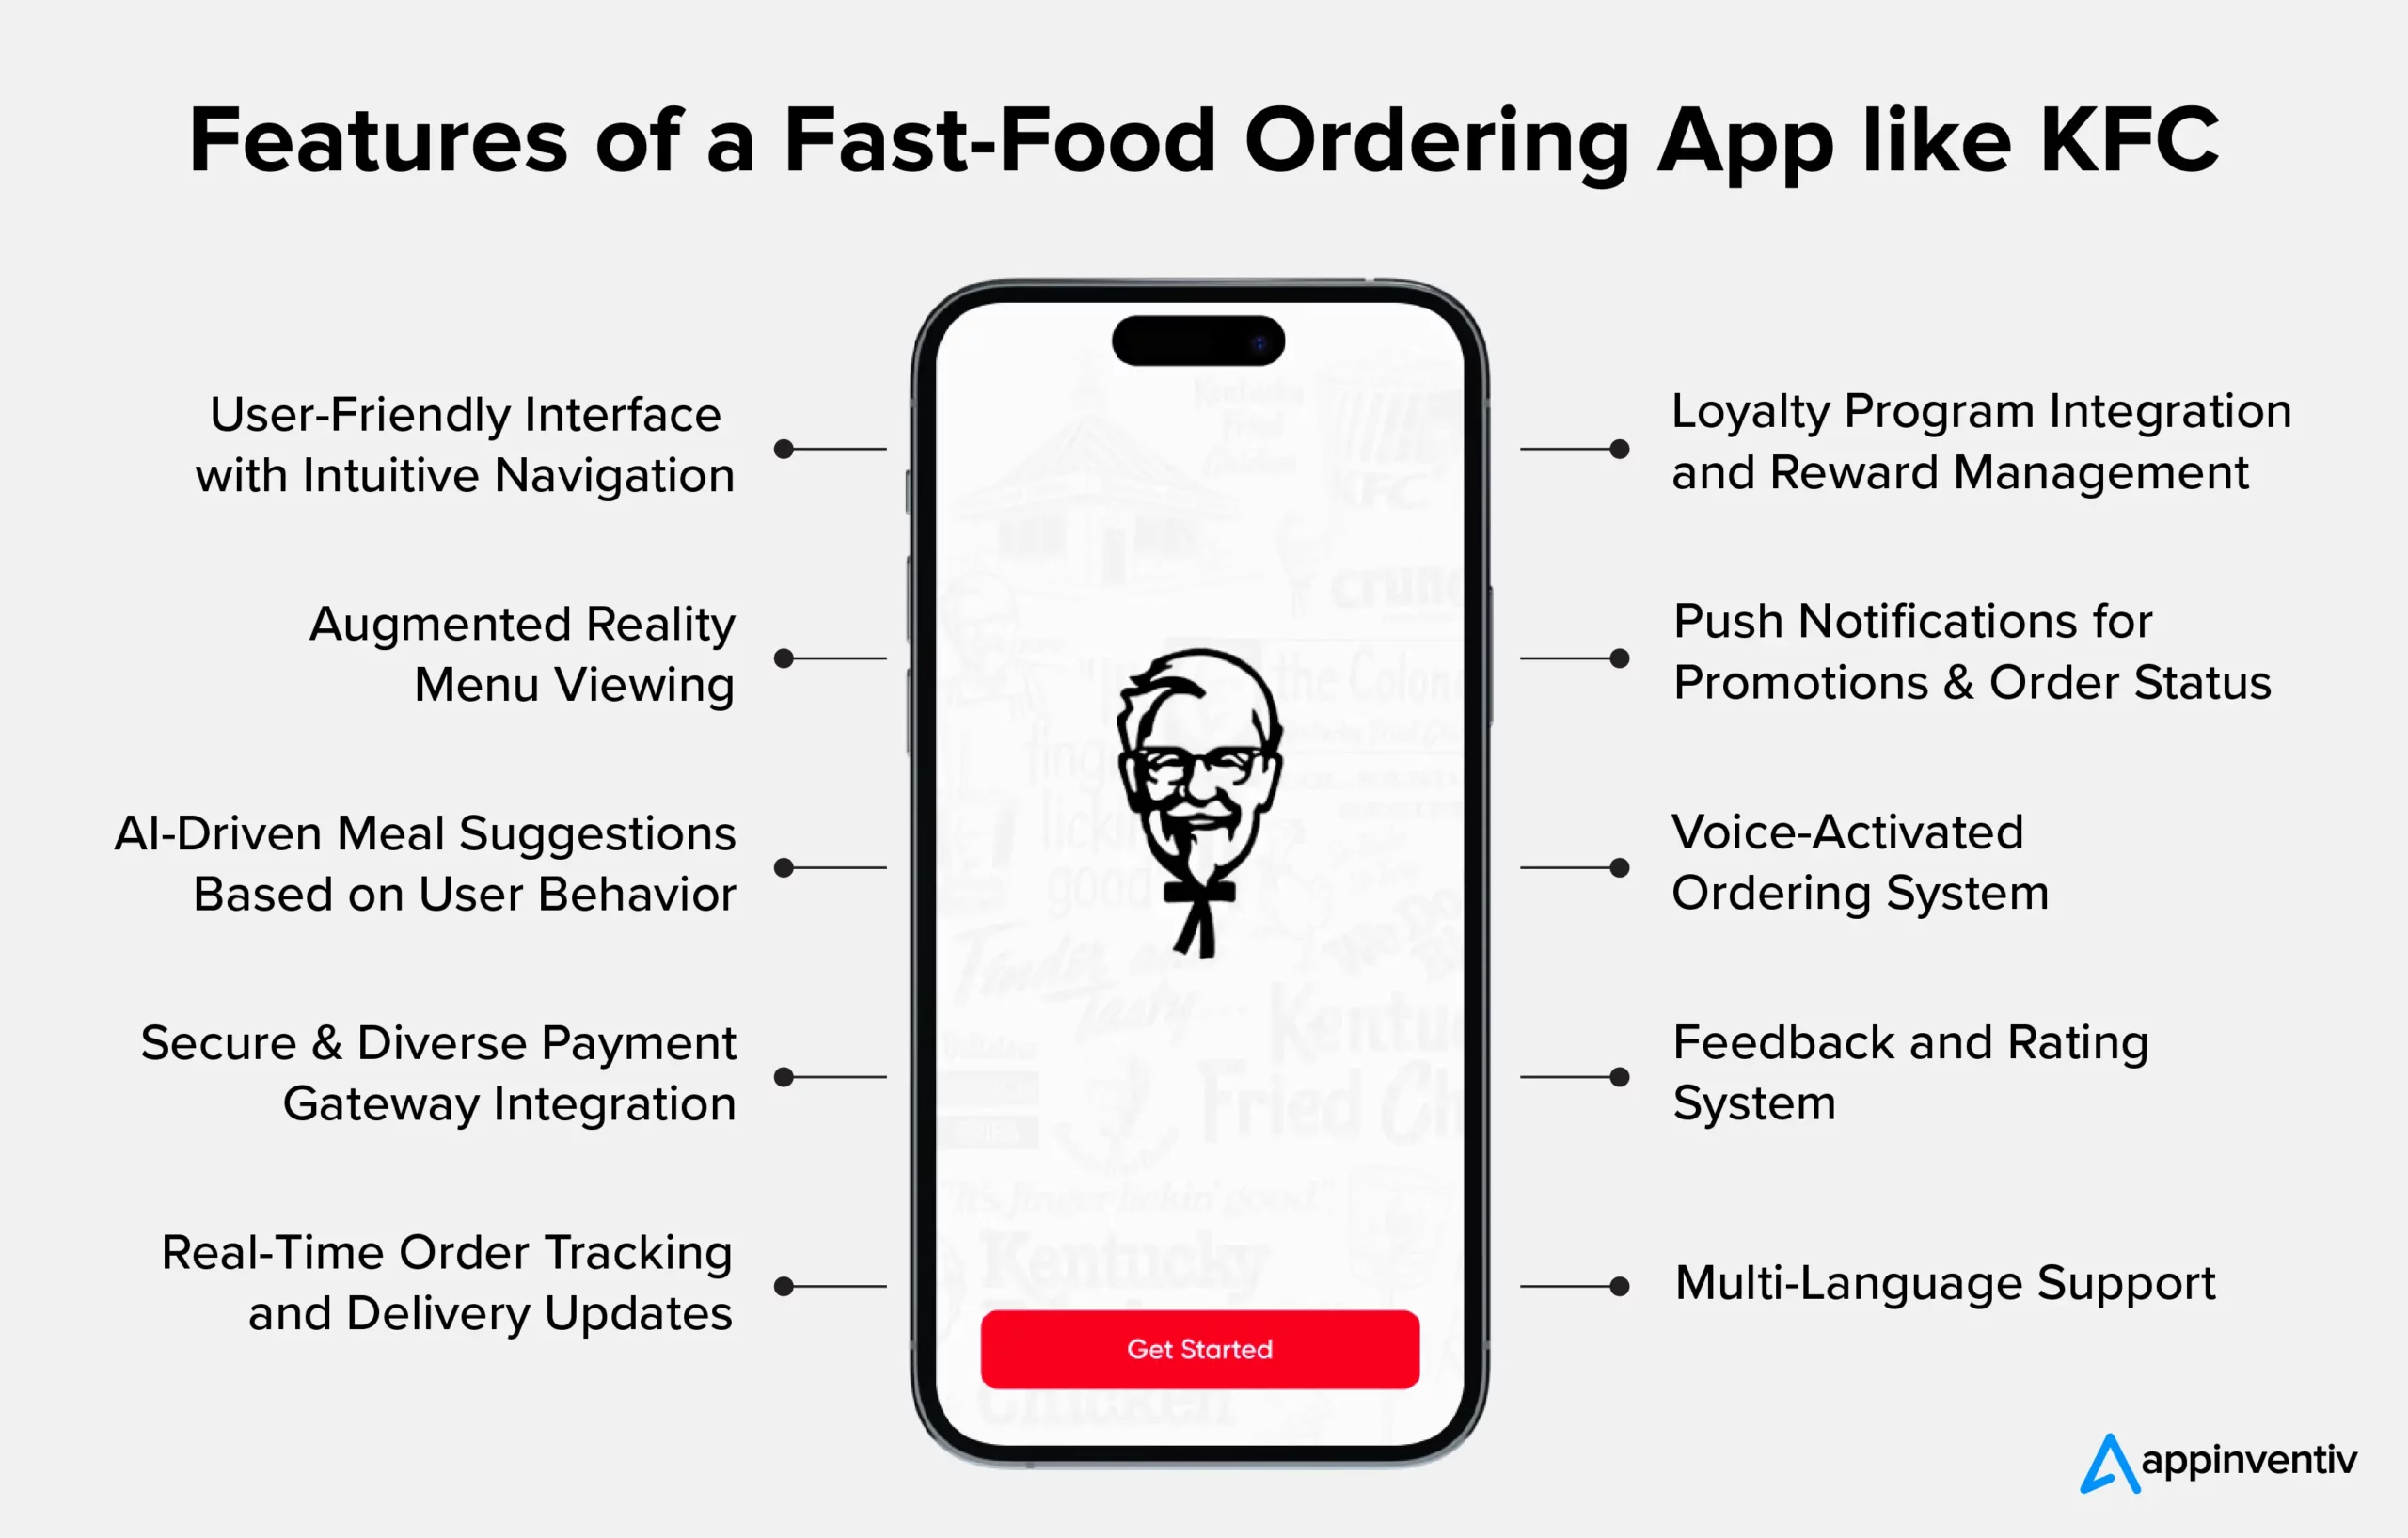 Features of a fast-food ordering app like KFC 